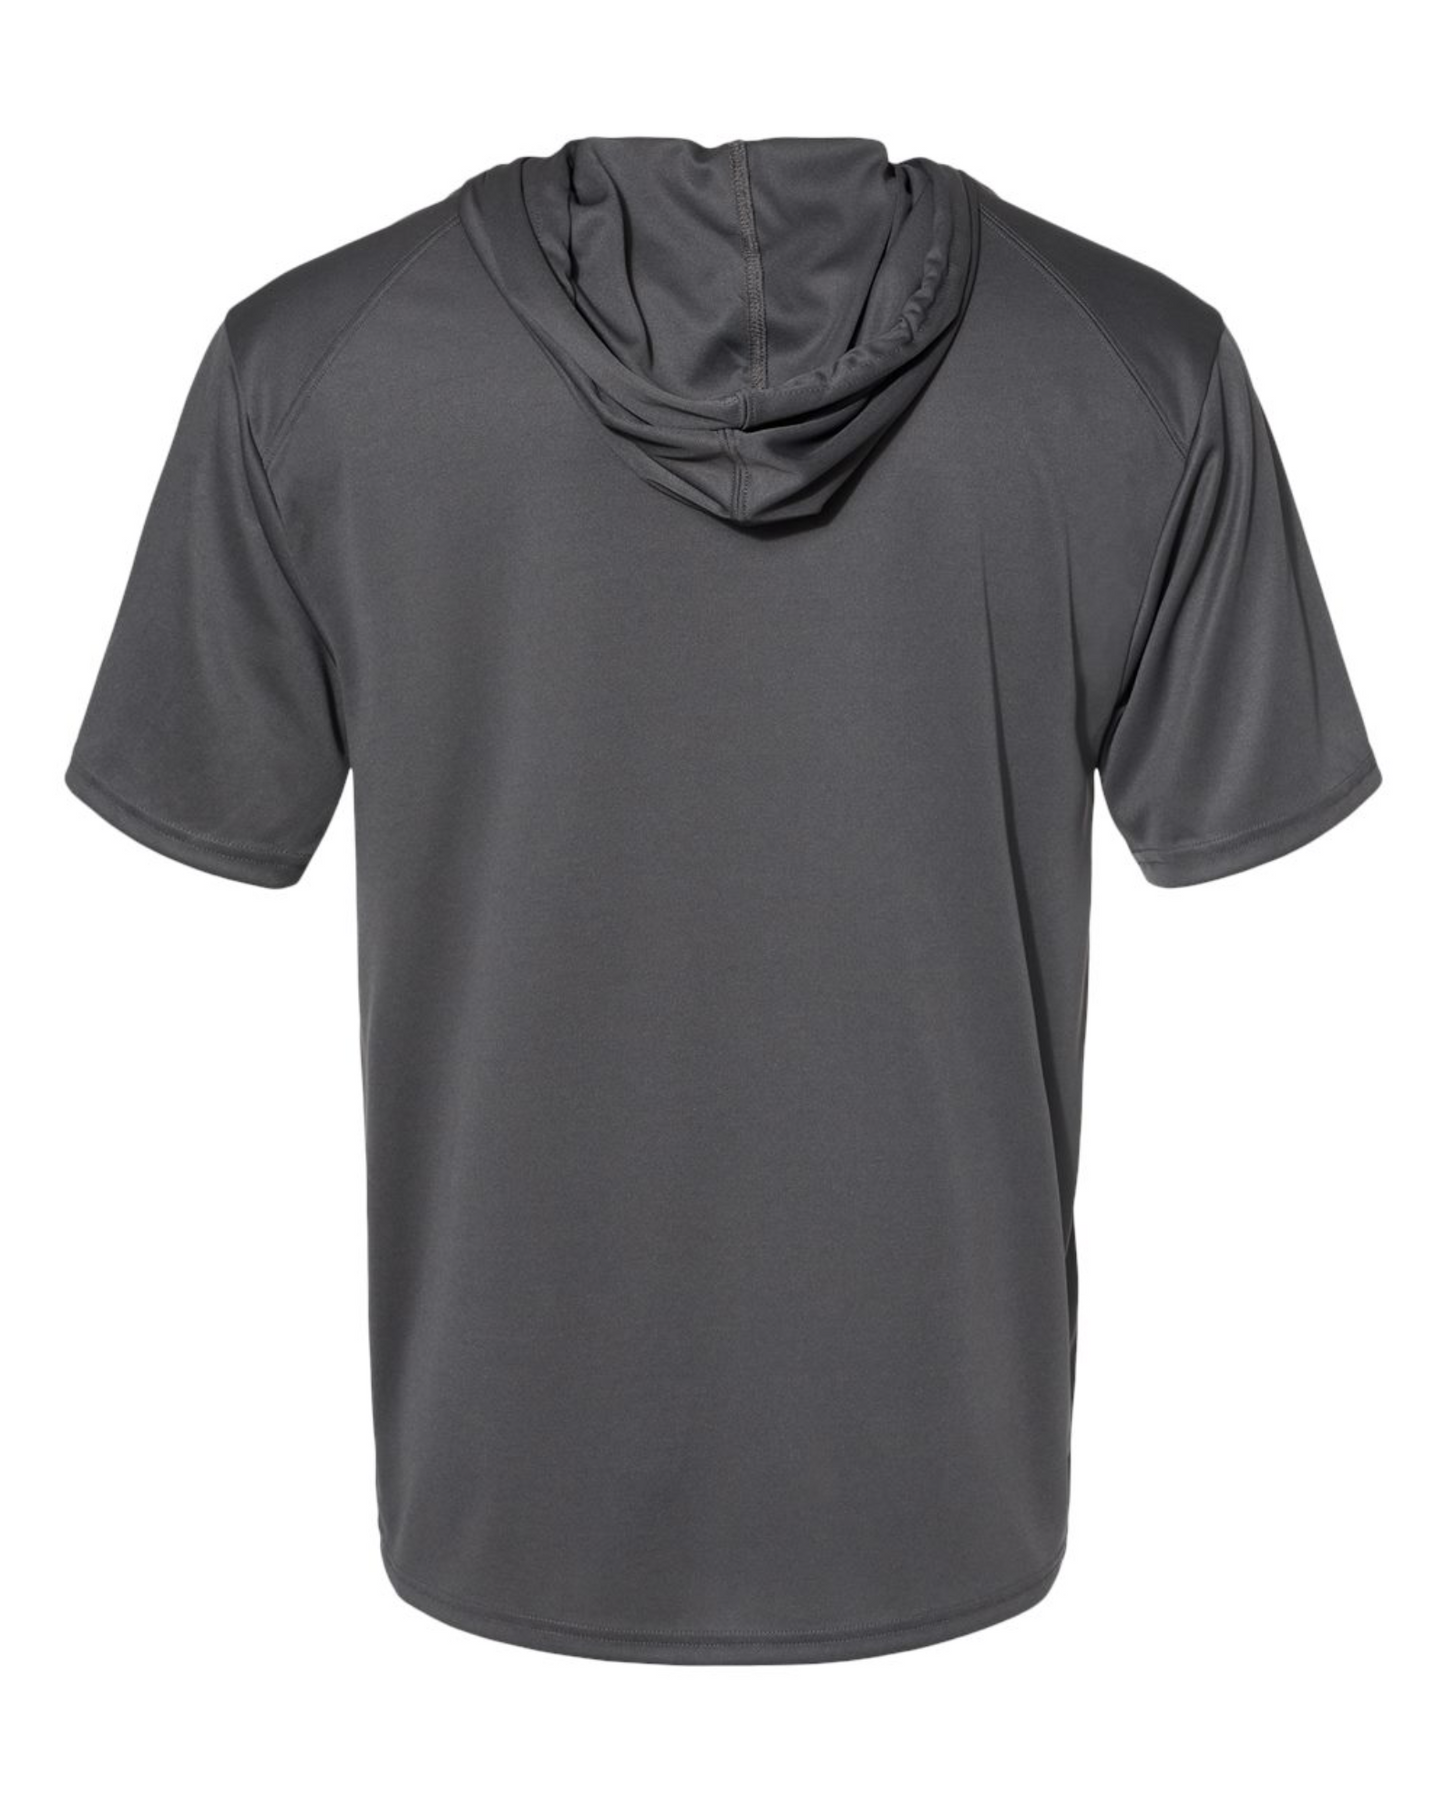 Hooded Activewear: Eye Am (Silver Patch)